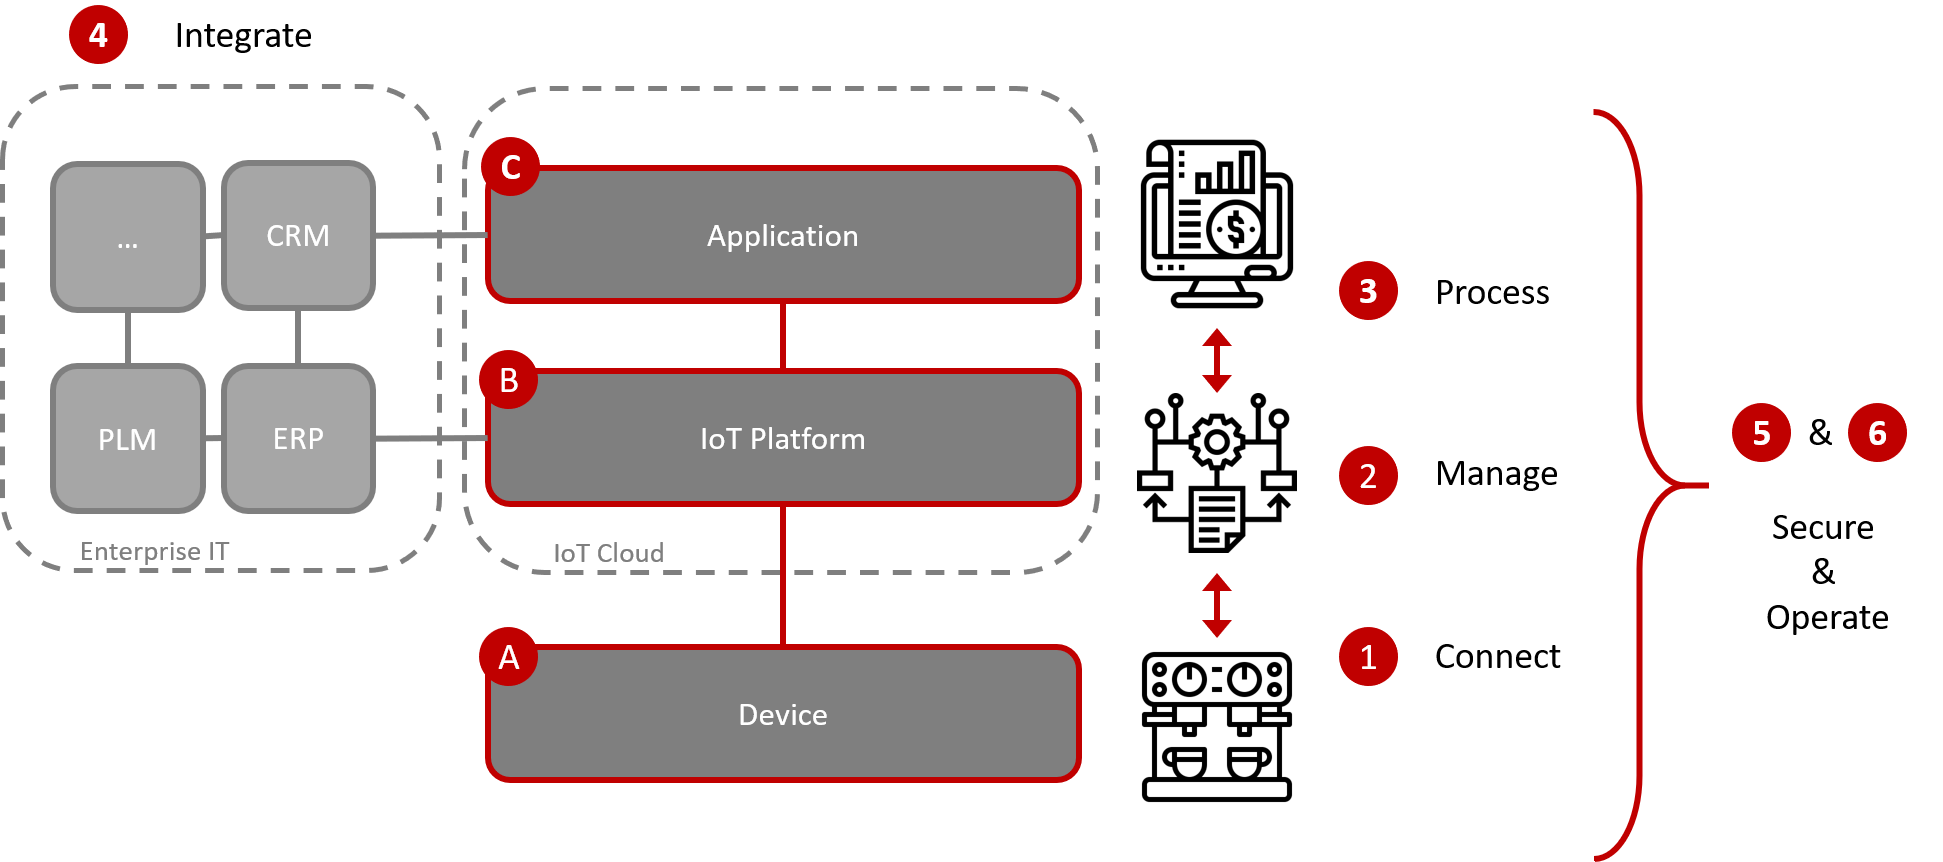 iot-solutions-structure-and-processes-explained-morethandigital